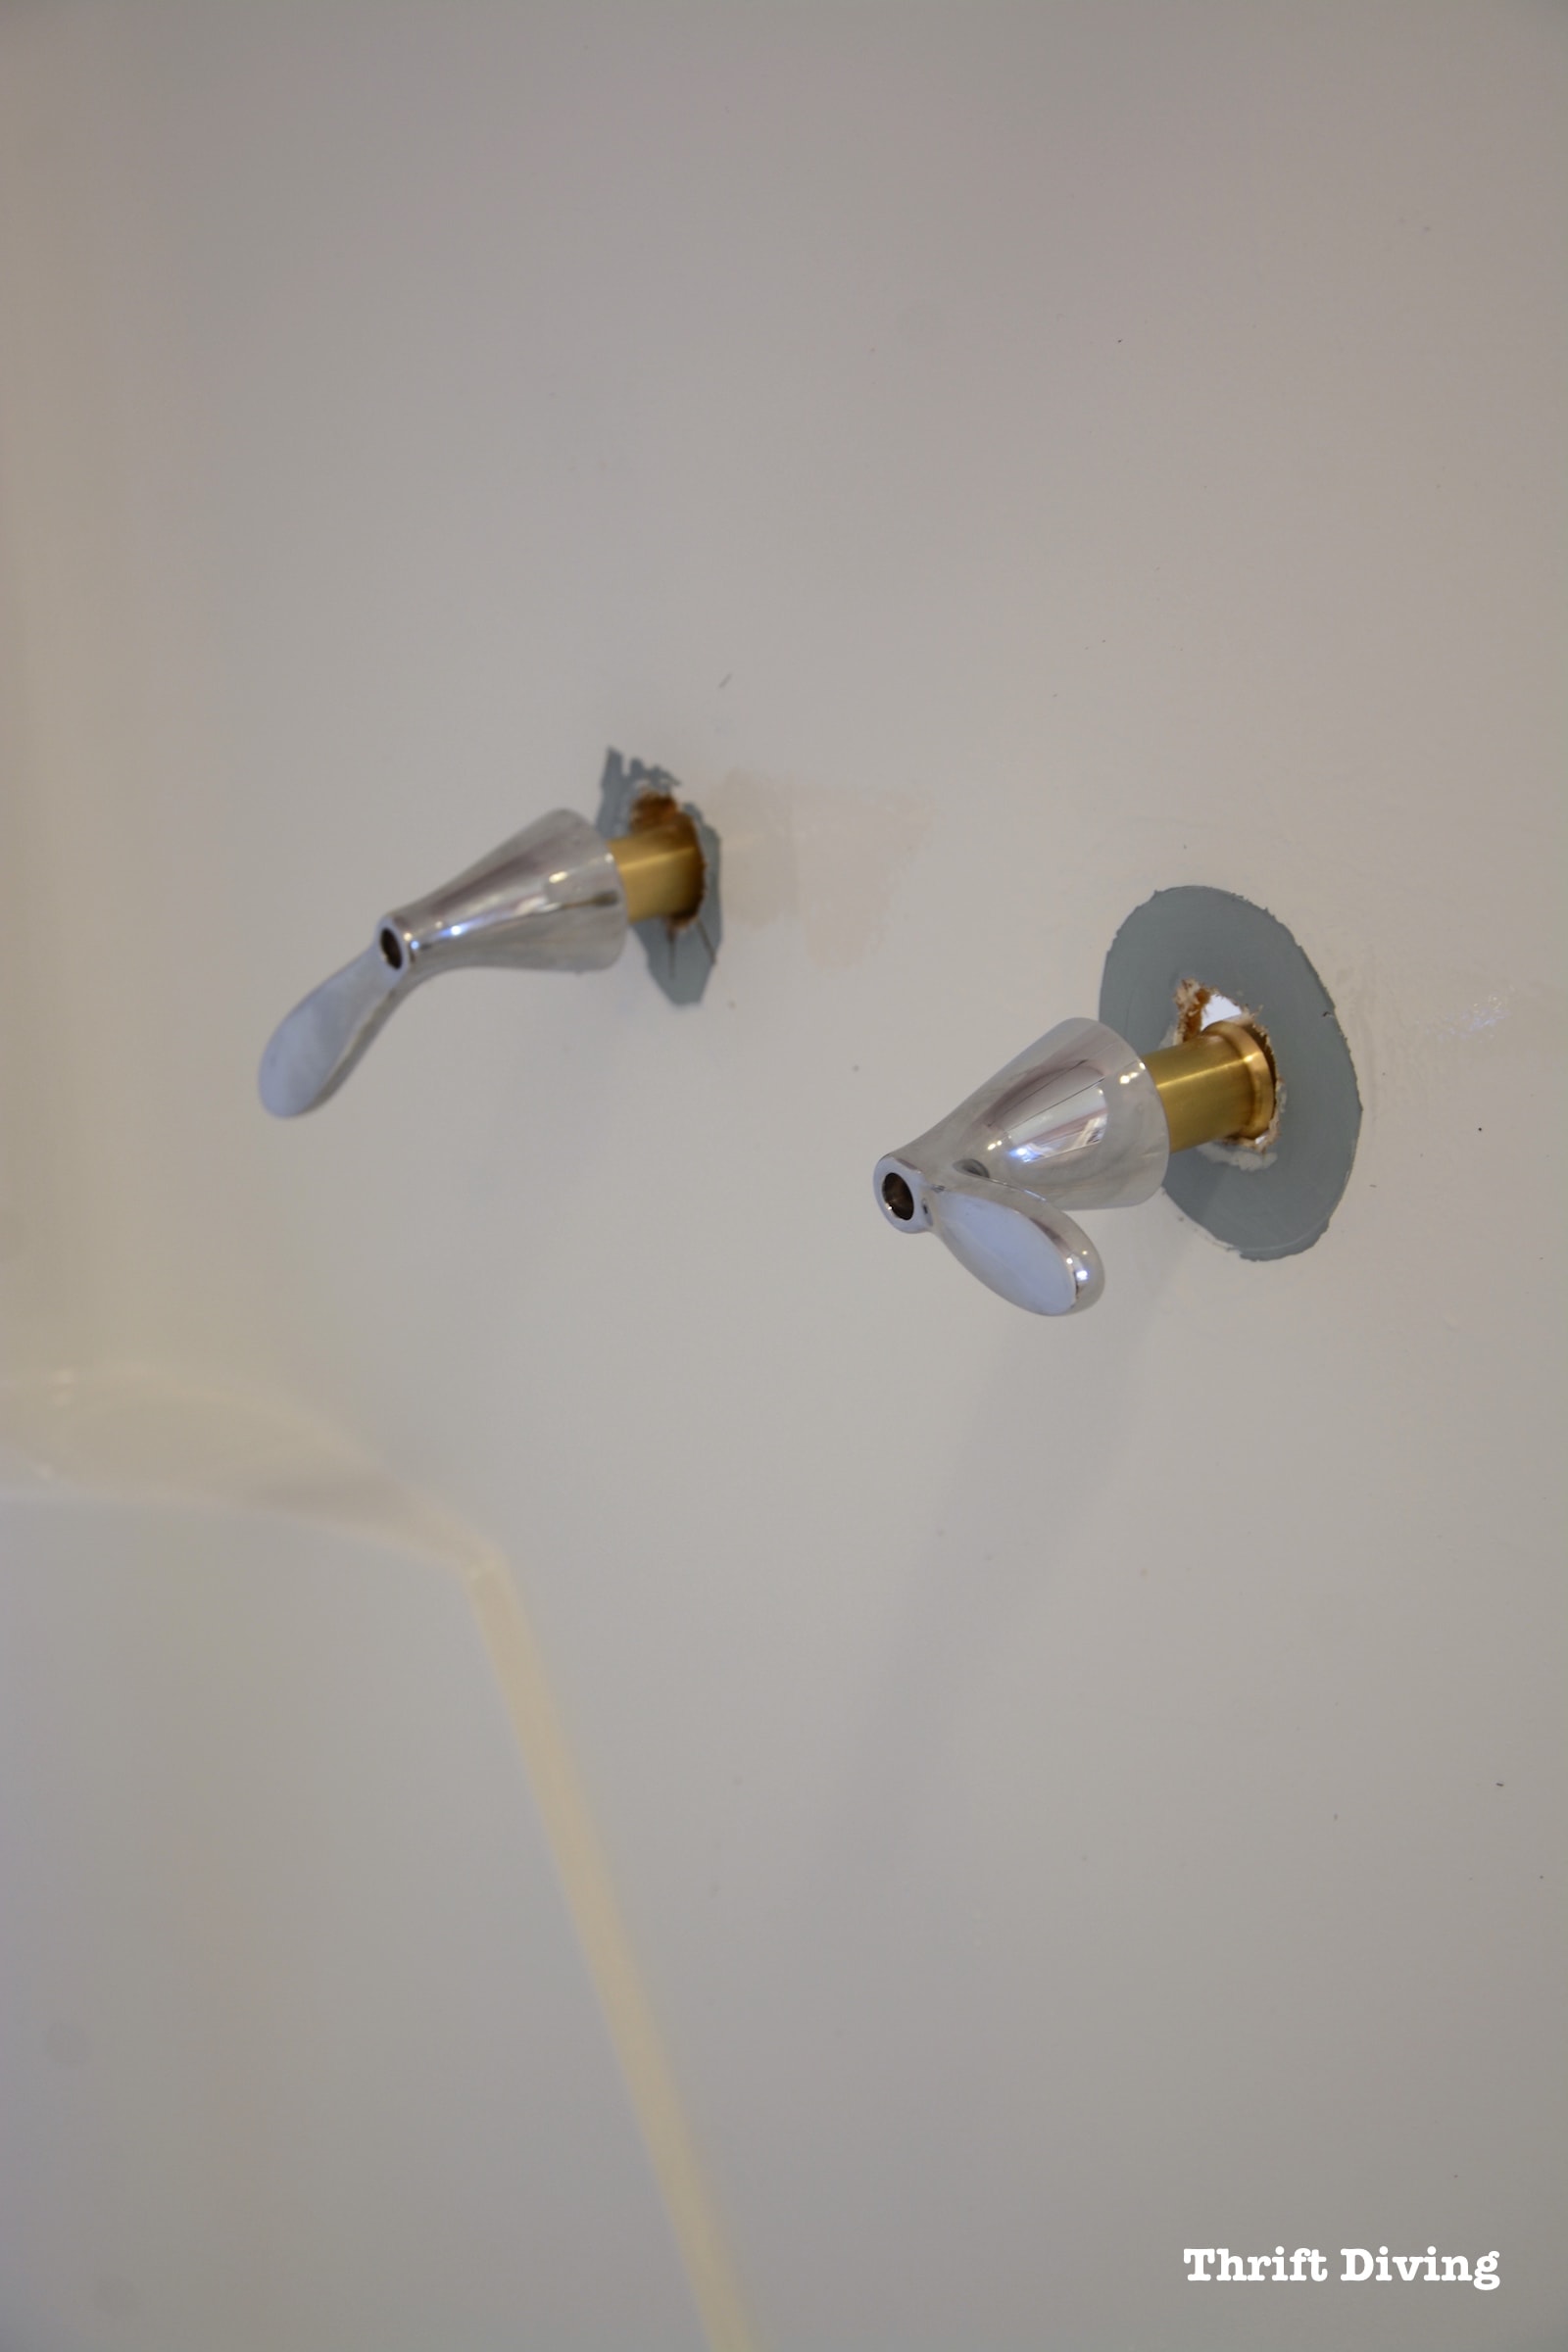 Shower-and-tub-refinishing-how-to-paint-a-shower-tub - Thrift Diving Blog - 9212